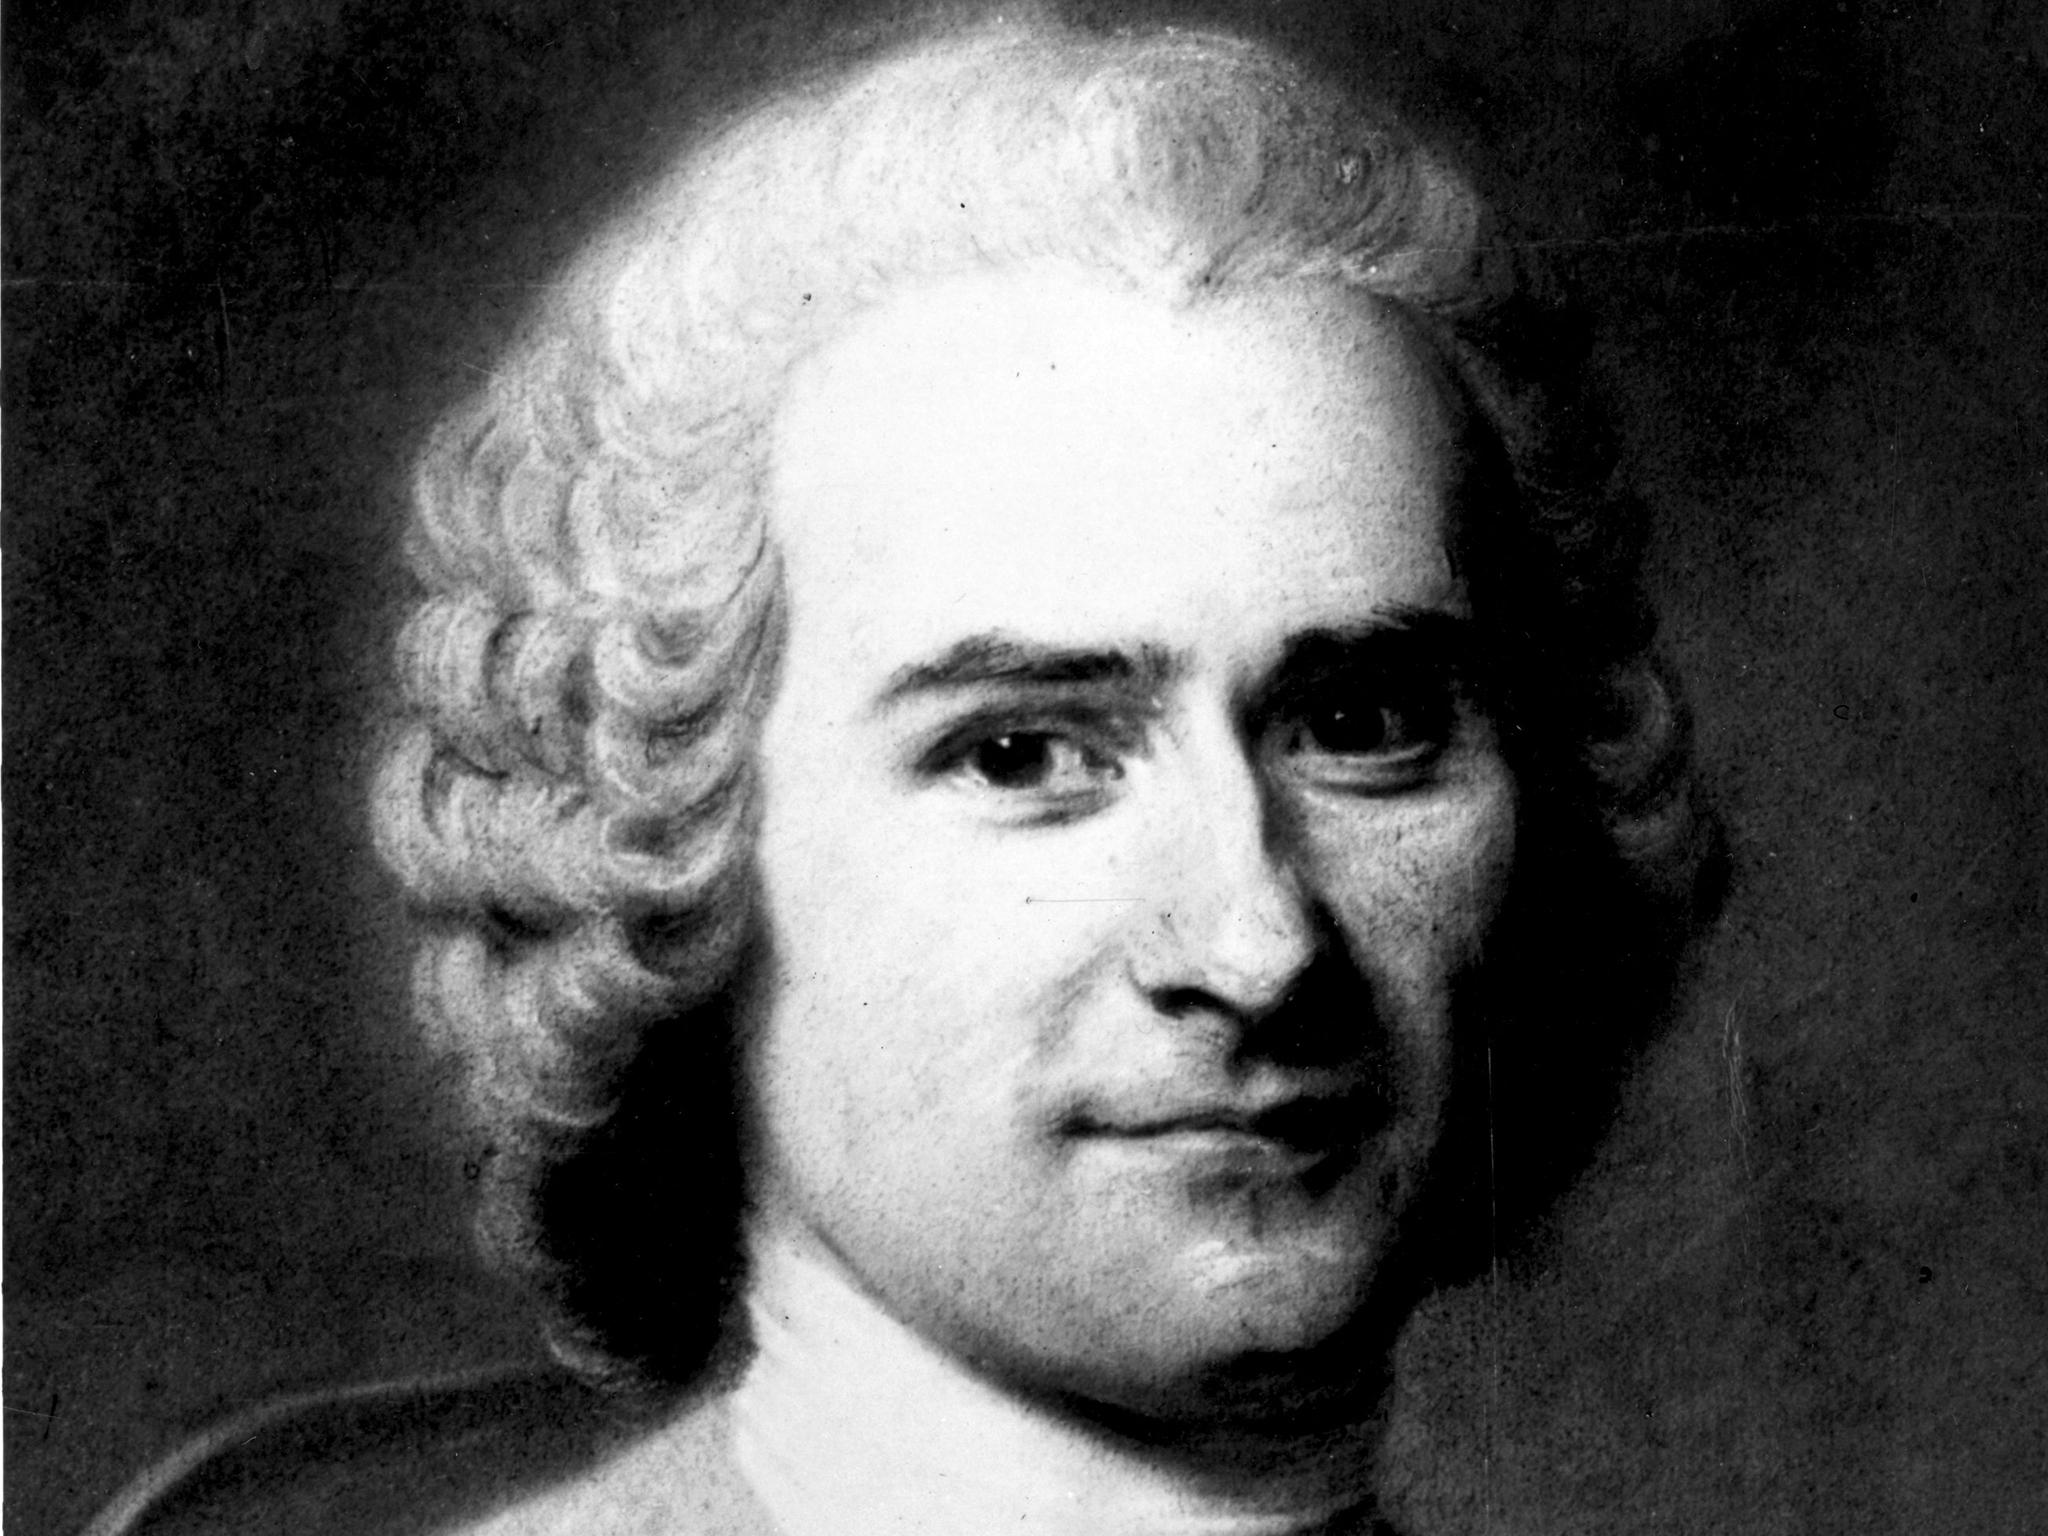 Public eye: Rousseau was perhaps the first celebrity writer and thinker